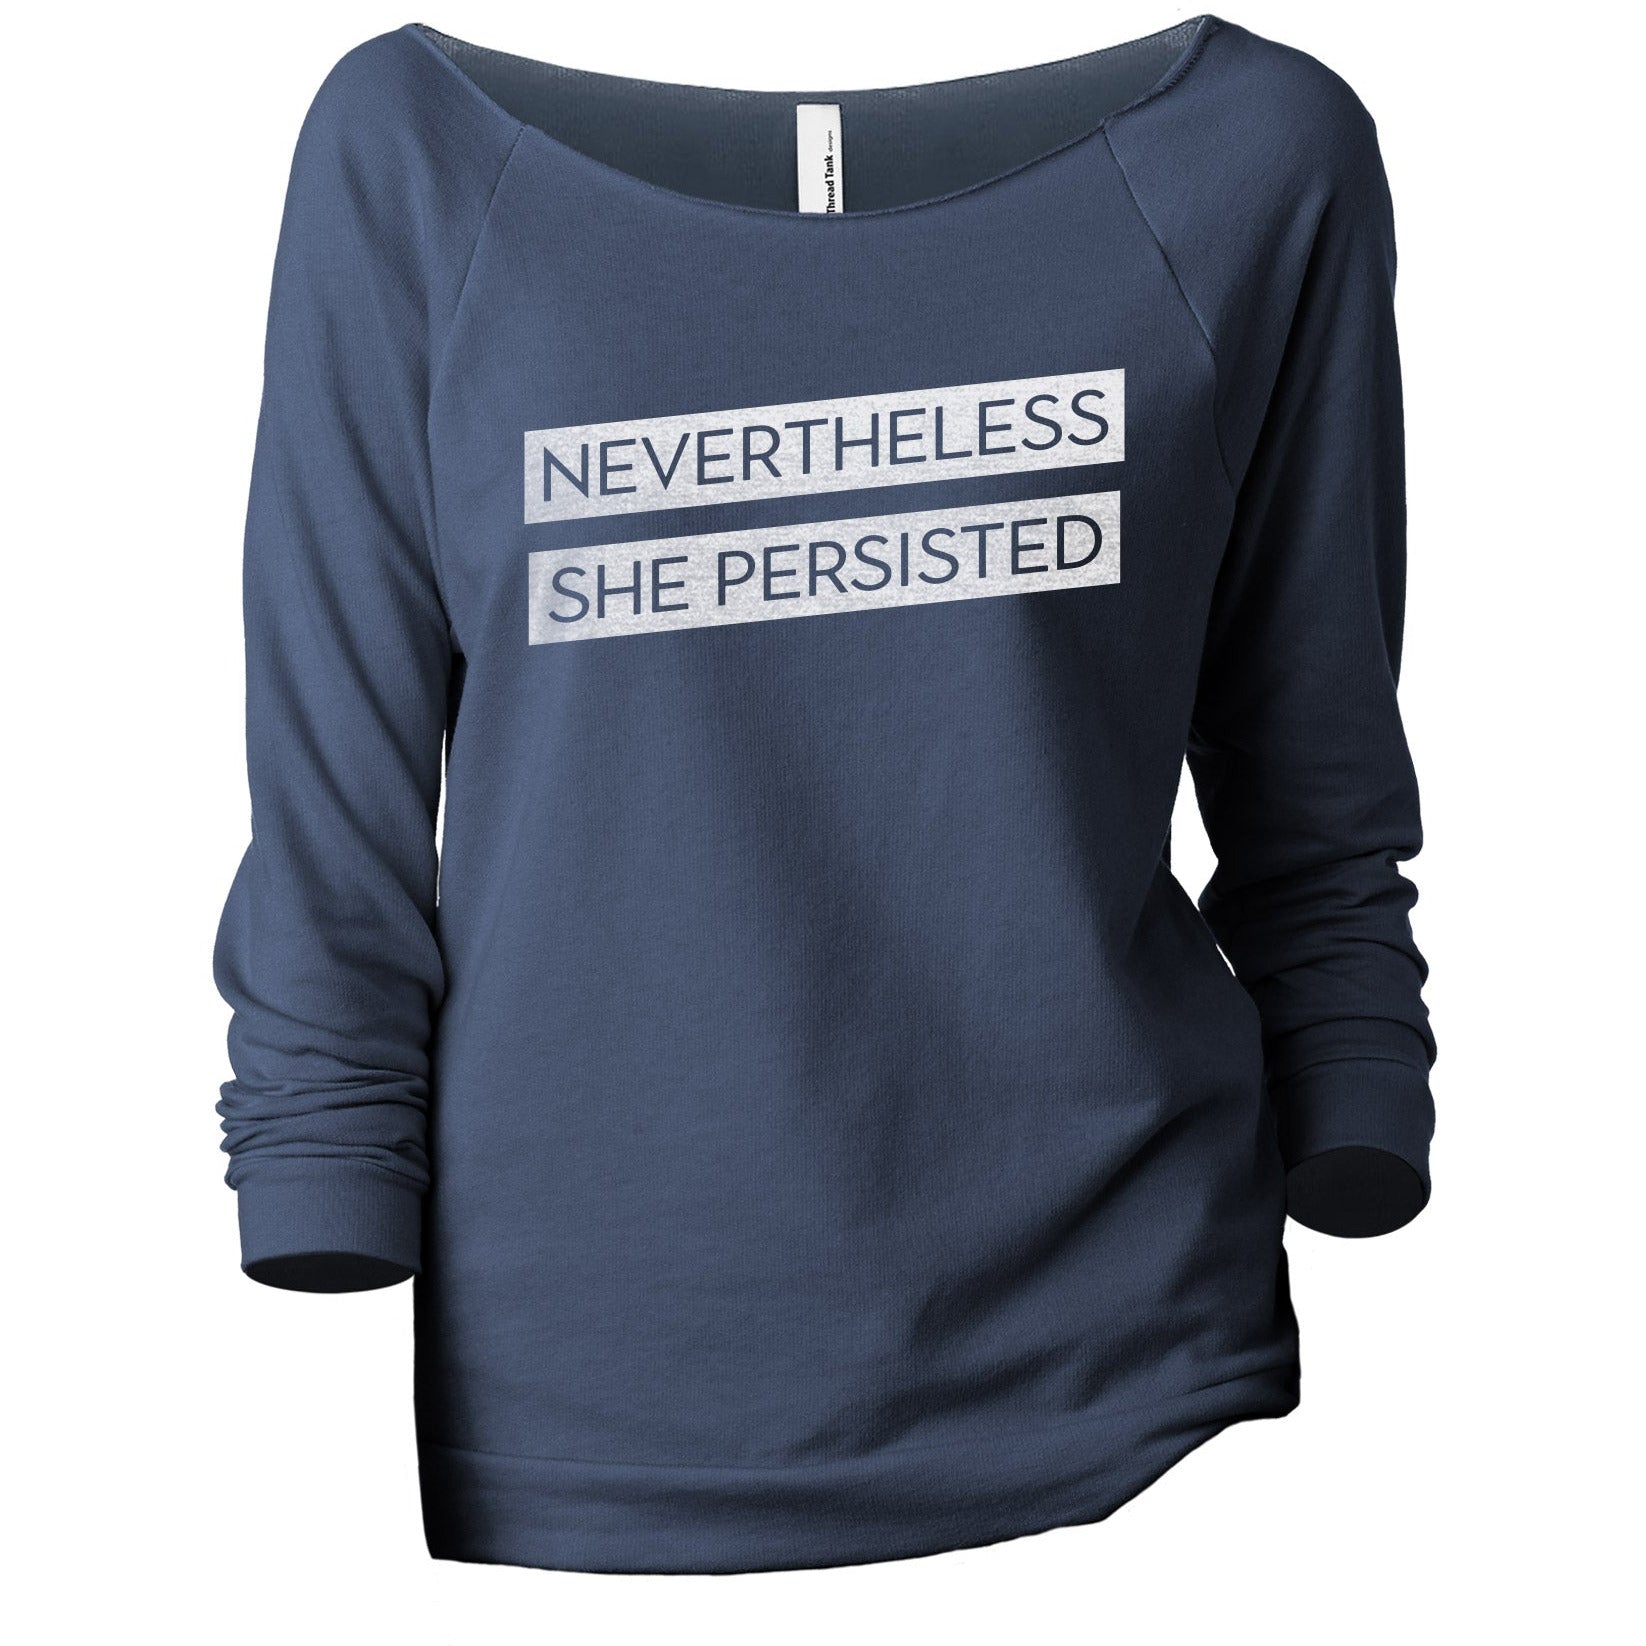 Nevertheless She Persisted Women's Graphic Printed Lightweight Slouchy 3/4 Sleeves Sweatshirt Navy